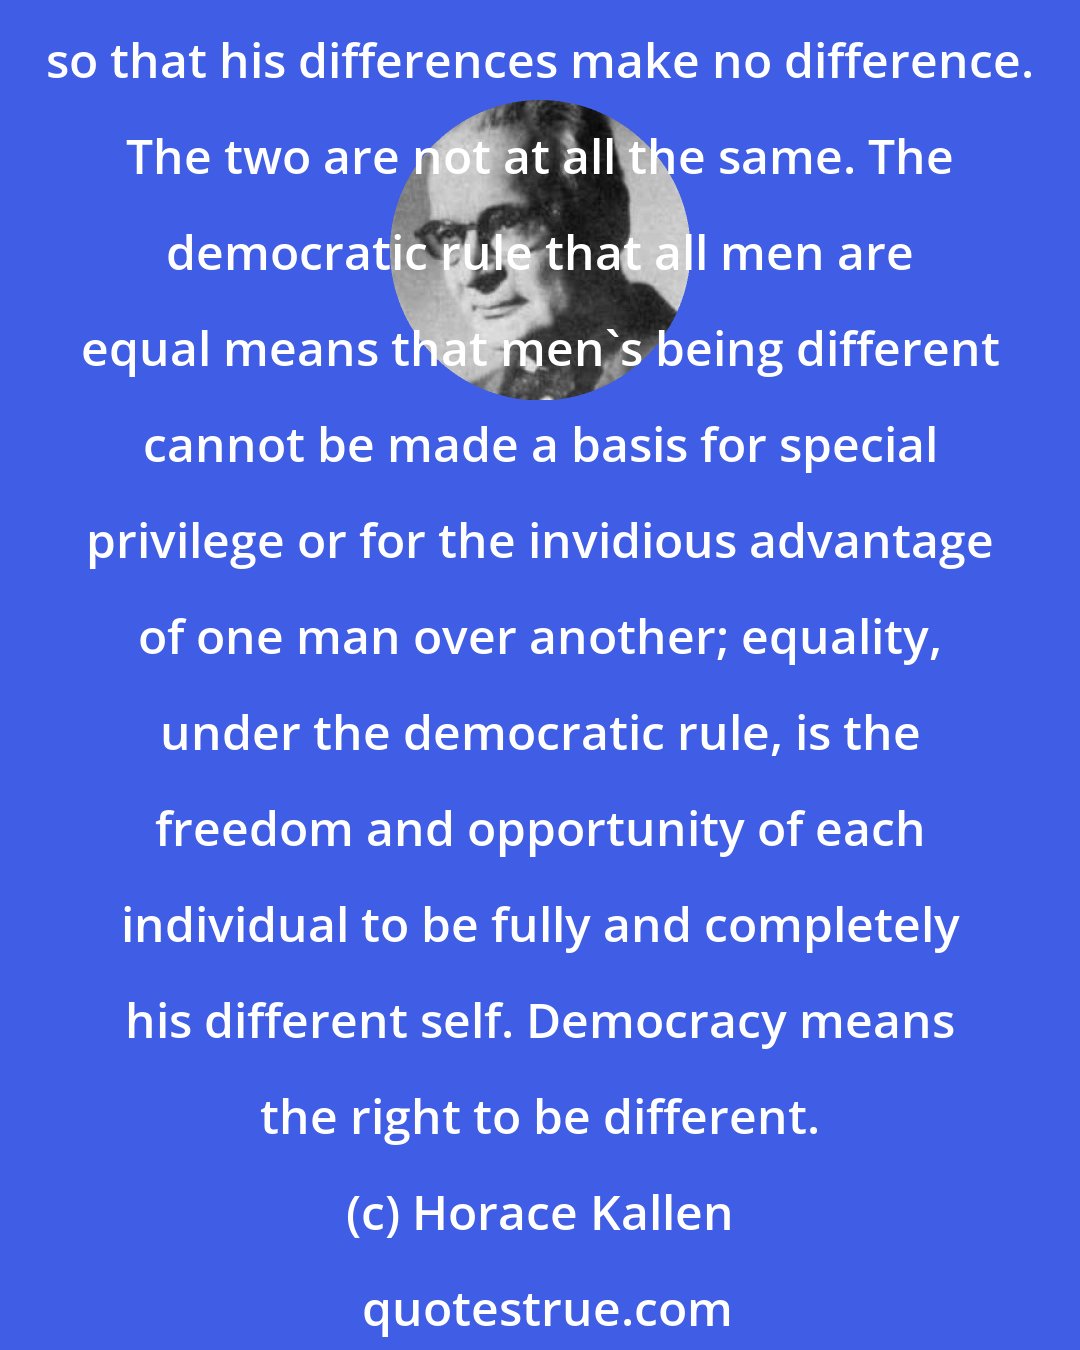 Horace Kallen: The democratic rule that all men are equal is sometimes confused with the quite opposite idea that all men are the same and that any man can be substituted for any other so that his differences make no difference. The two are not at all the same. The democratic rule that all men are equal means that men's being different cannot be made a basis for special privilege or for the invidious advantage of one man over another; equality, under the democratic rule, is the freedom and opportunity of each individual to be fully and completely his different self. Democracy means the right to be different.